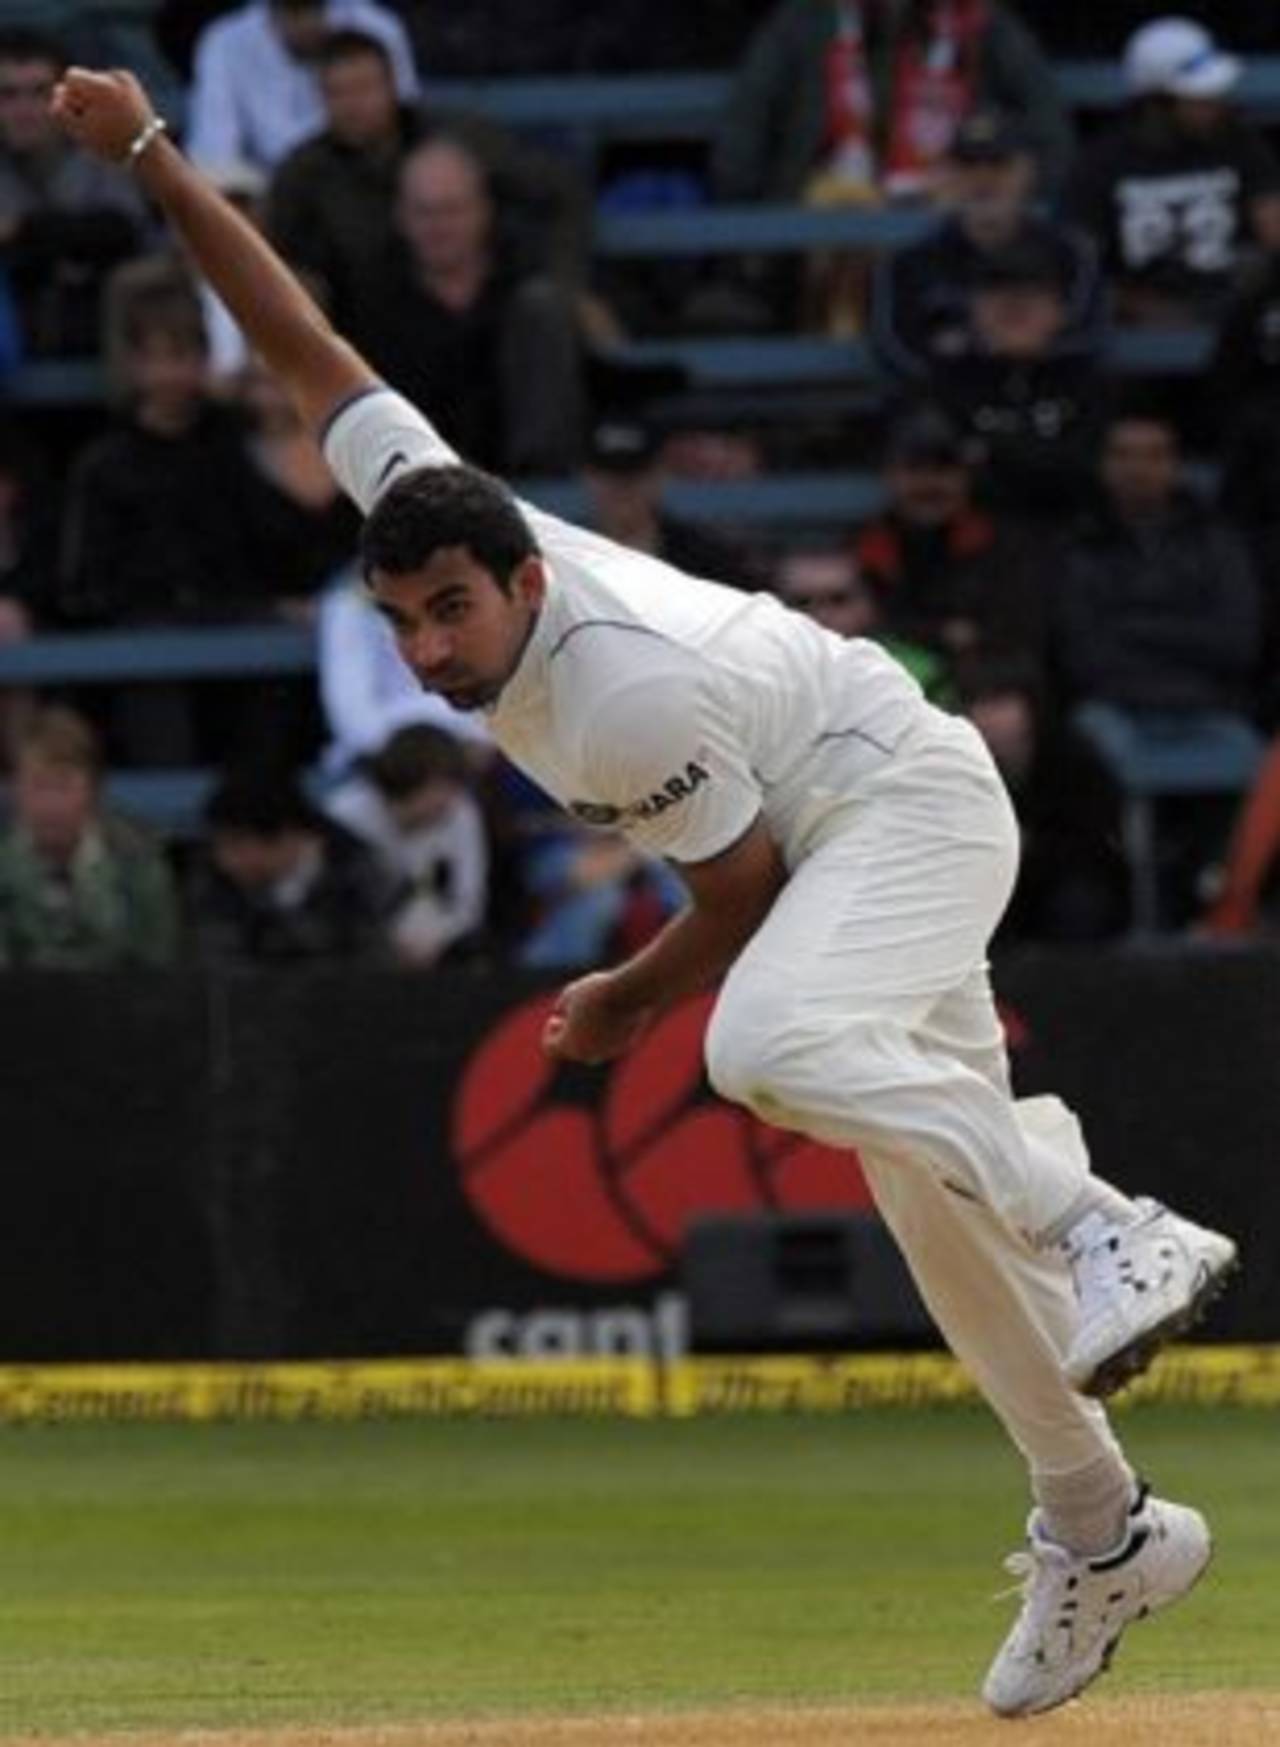 Zaheer Khan tailored his run-up to suit the windy conditions at the Basin Reserve&nbsp;&nbsp;&bull;&nbsp;&nbsp;AFP